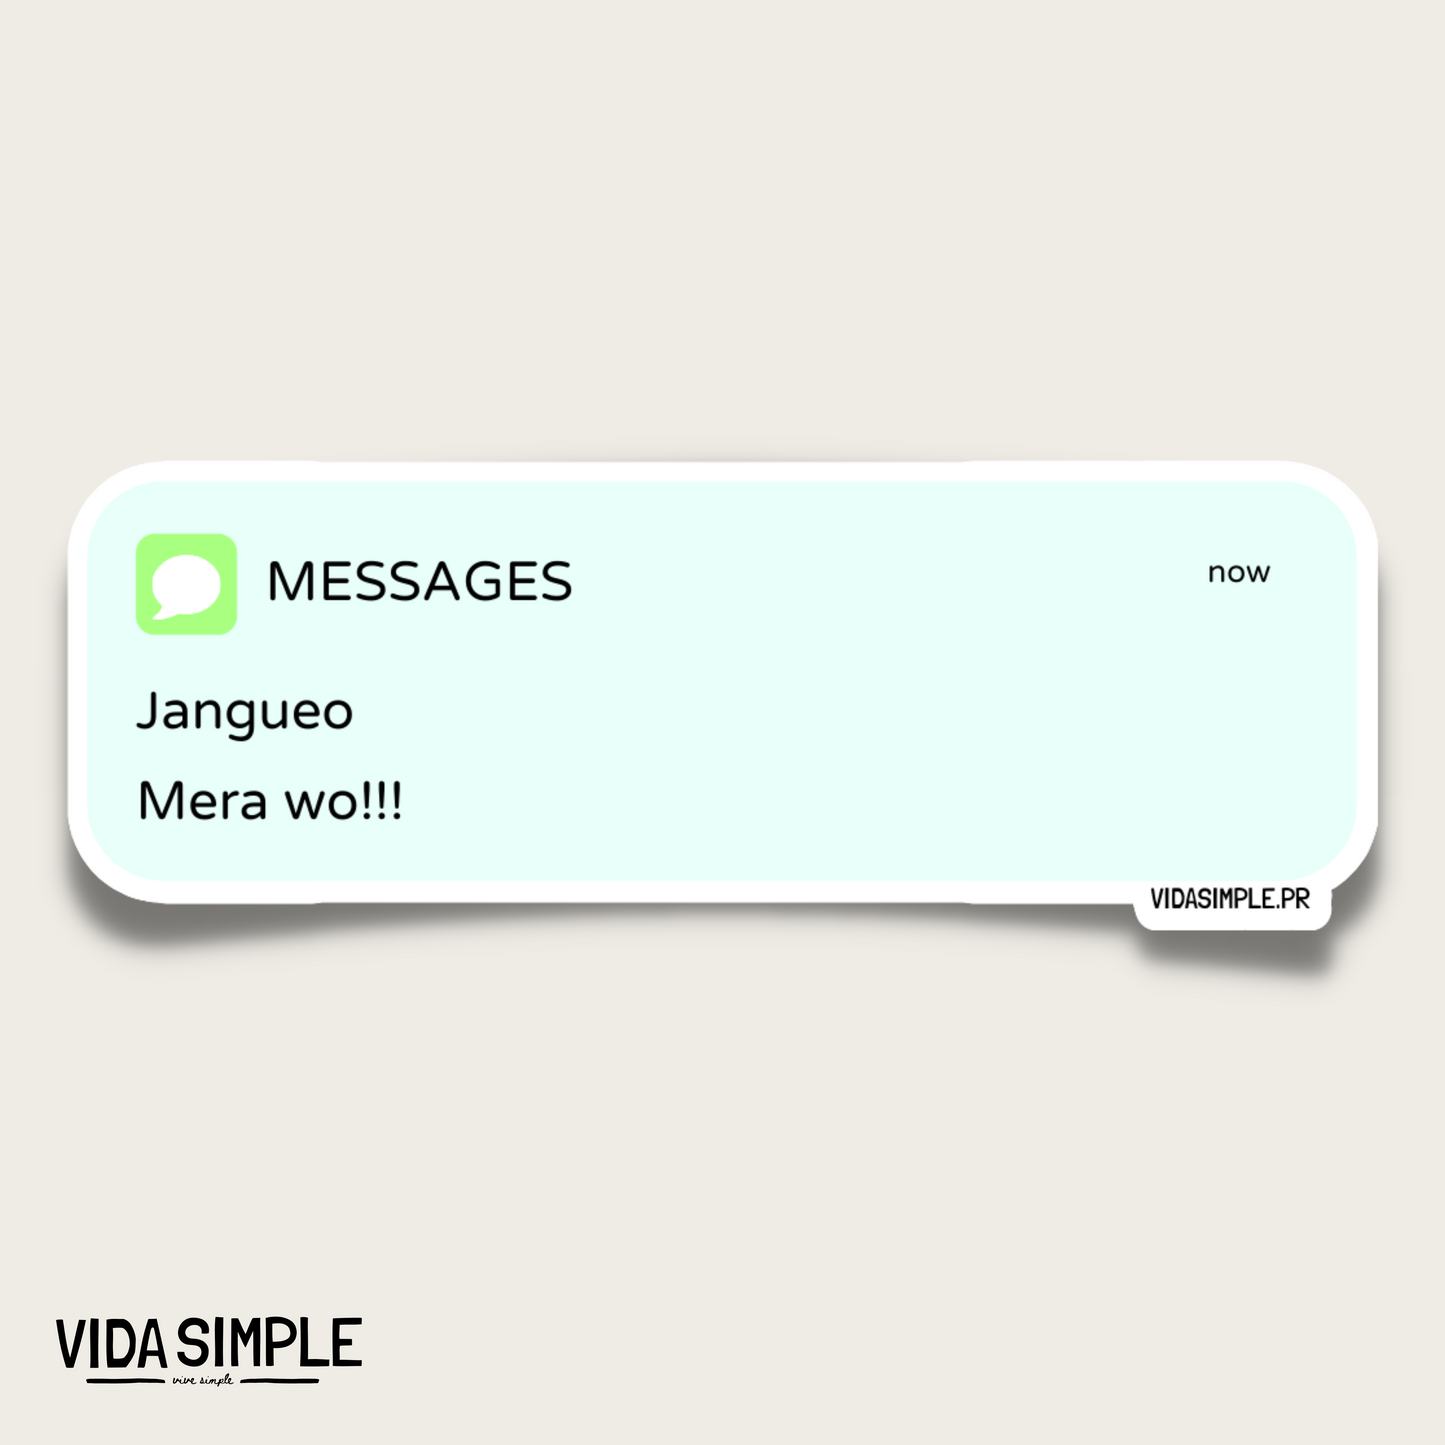 Message from: Jangueo